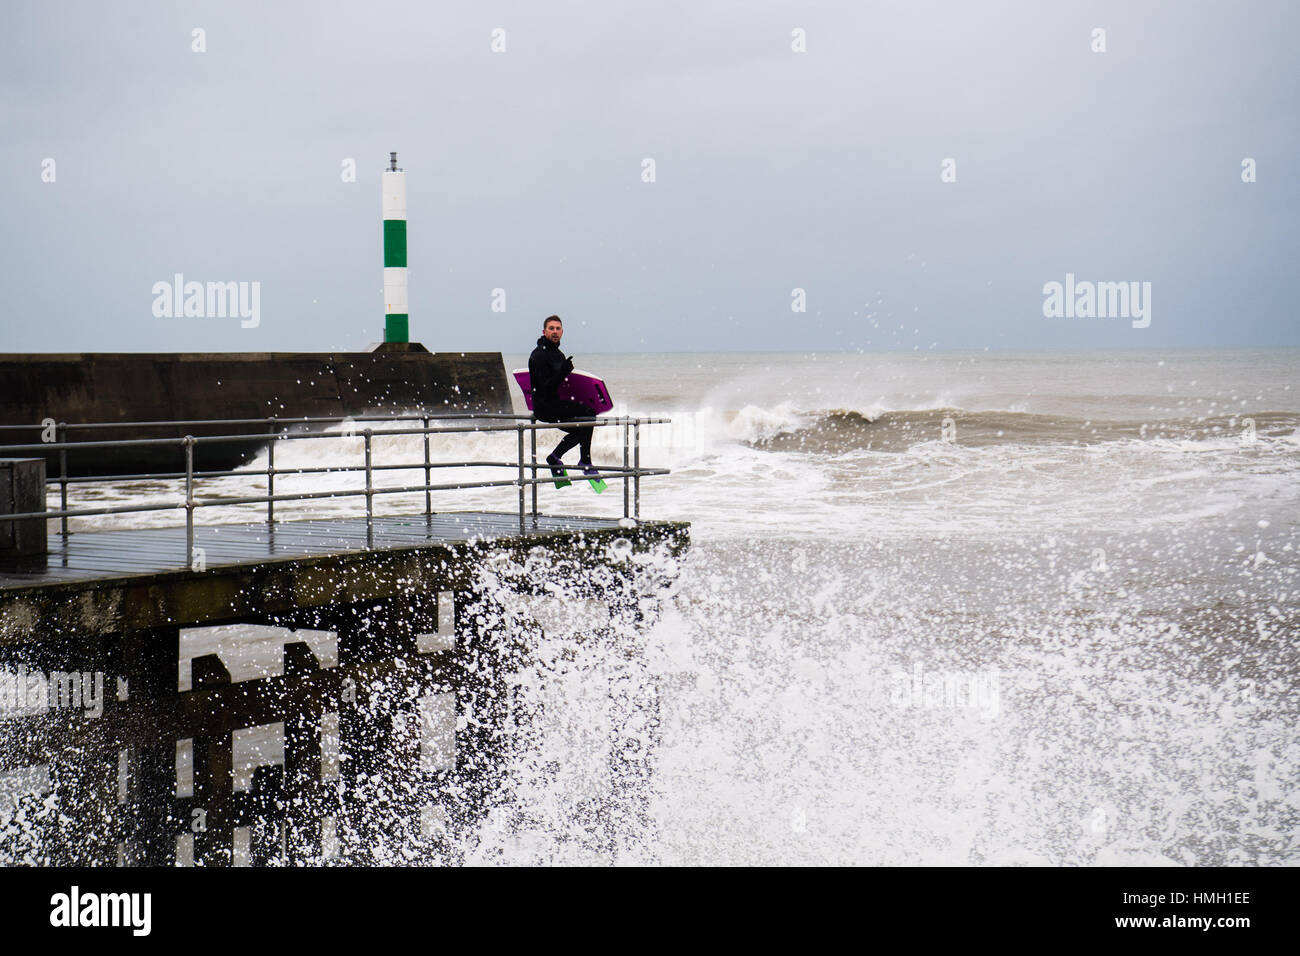 Aberystwyth, Ceredigion, Wales, UK. 3rd Feb, 2017. UK Weather. High tides and a strong Atlantic swell this morning bring huge waves crashing into the promenade and sea defences in Aberystwyth on the west wales coast. A brave body-boarder takes the opportunity of riding some of the huge 10' high waves as they break near Aberystwyth harbour Potentially damaging gales, with gusts in excess of 60mph are forecast to strike parts of southern UK today photo Credit: Keith Morris/Alamy Live News Stock Photo